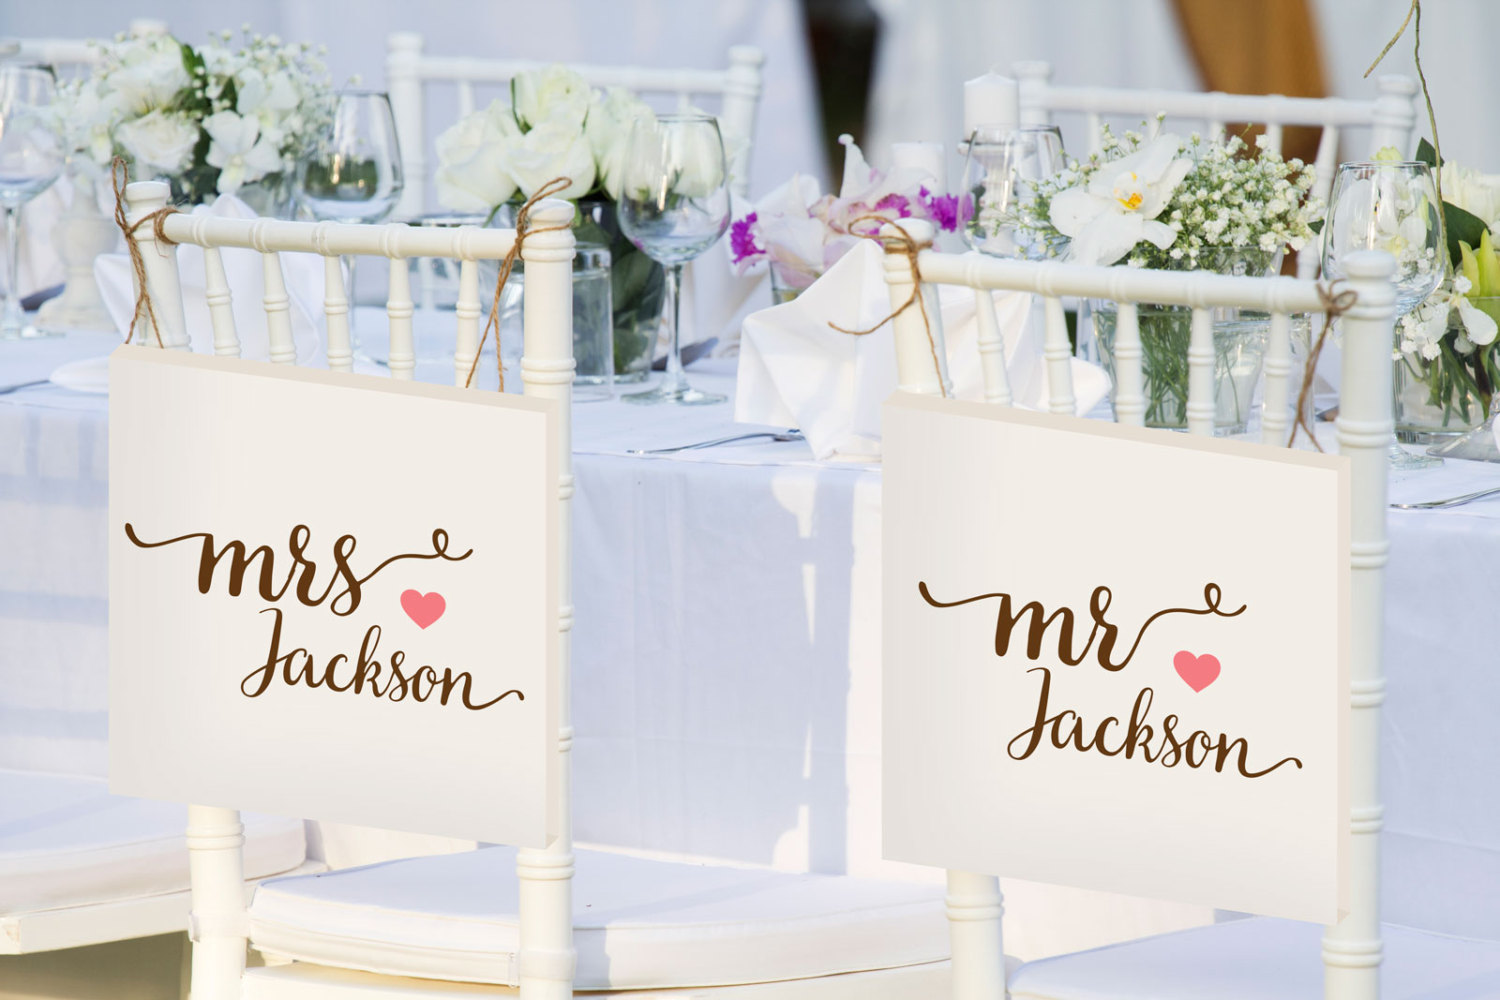 mr and mrs bride and groom chair signs personalized | via bride and groom chair signs https://emmalinebride.com/decor/bride-and-groom-chairs/